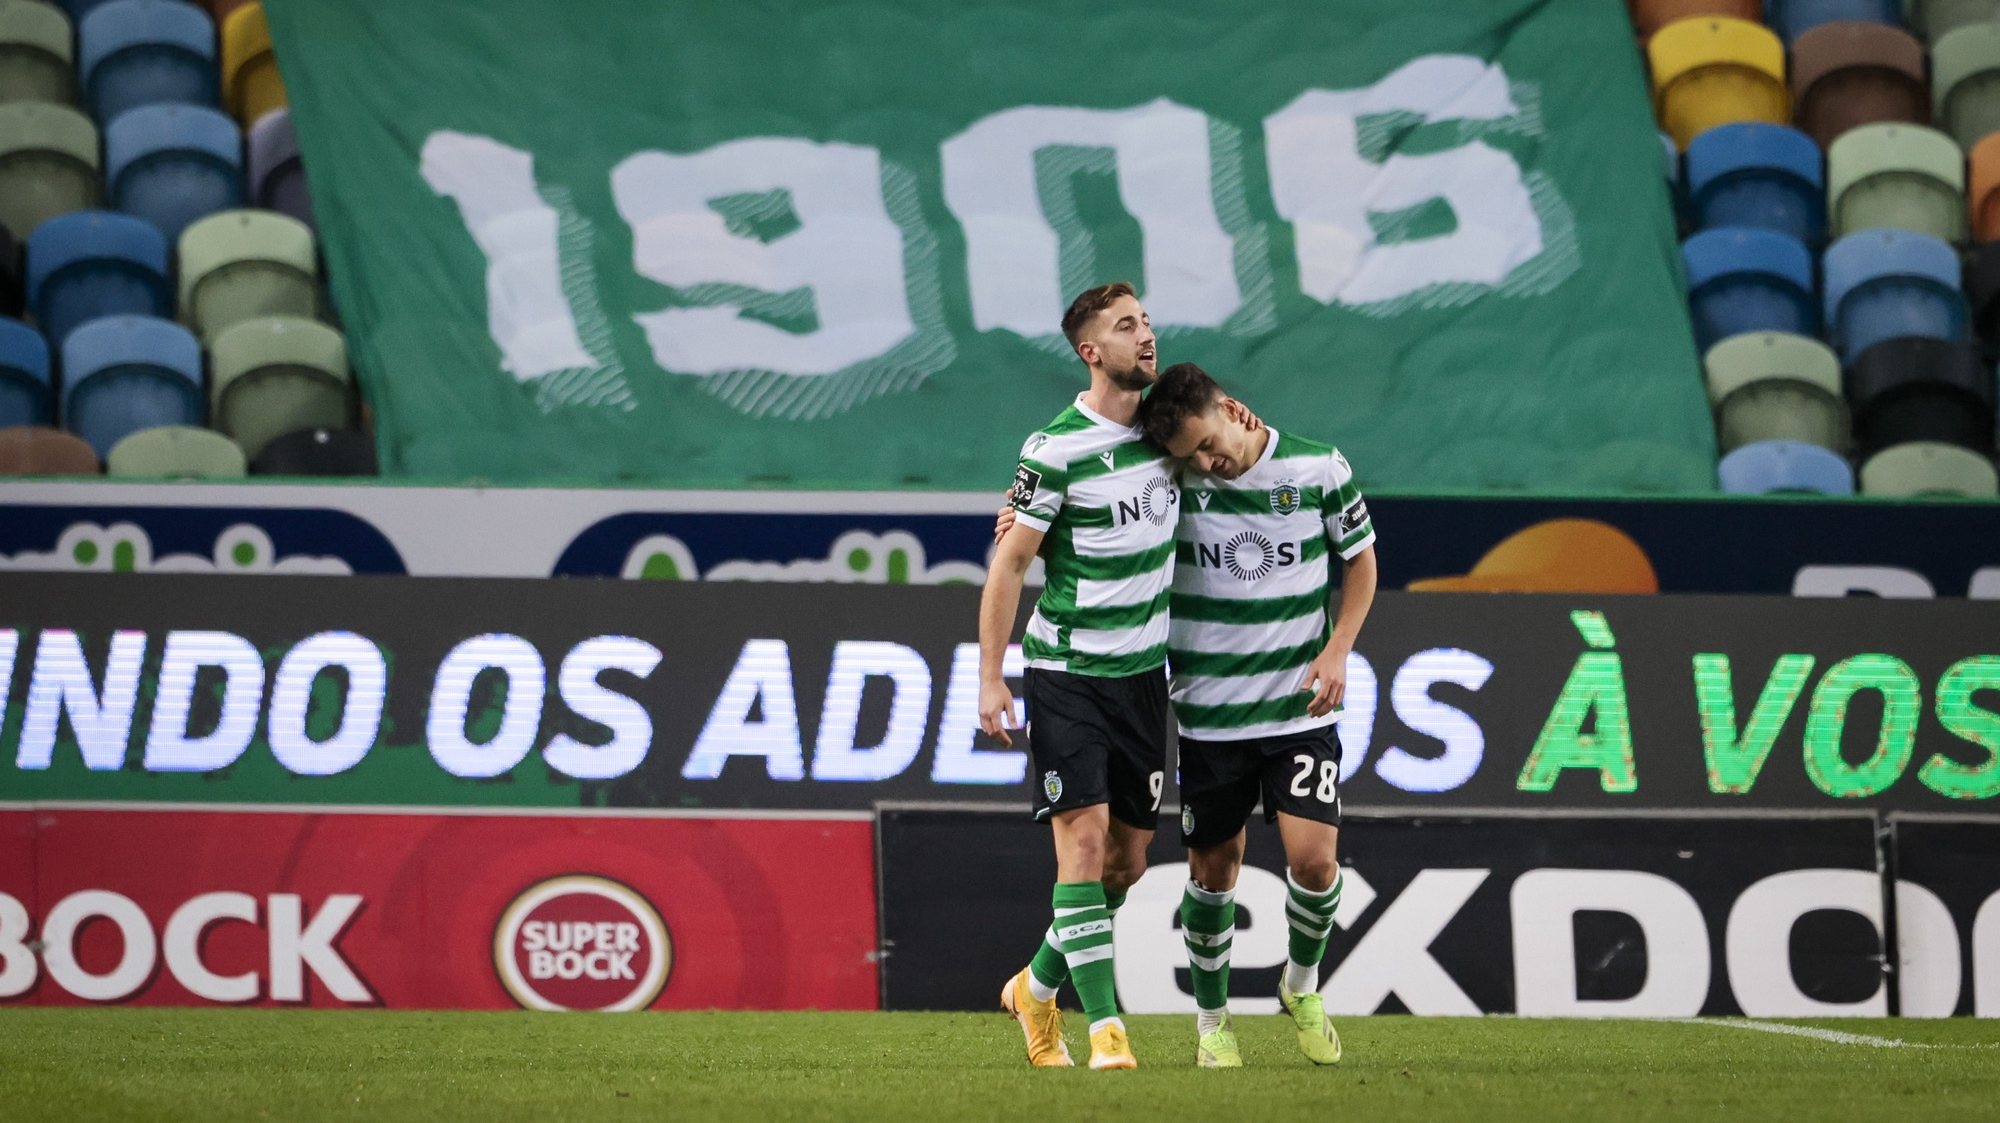 Sporting player Andraz Sporar (L) celebrates after scoring a goal during the Portuguese First League soccer match between Sporting and Farense, held at Alvalade Stadium in Lisbon, Portugal, 19 December 2020. JOSE SENA GOULAO/LUSA